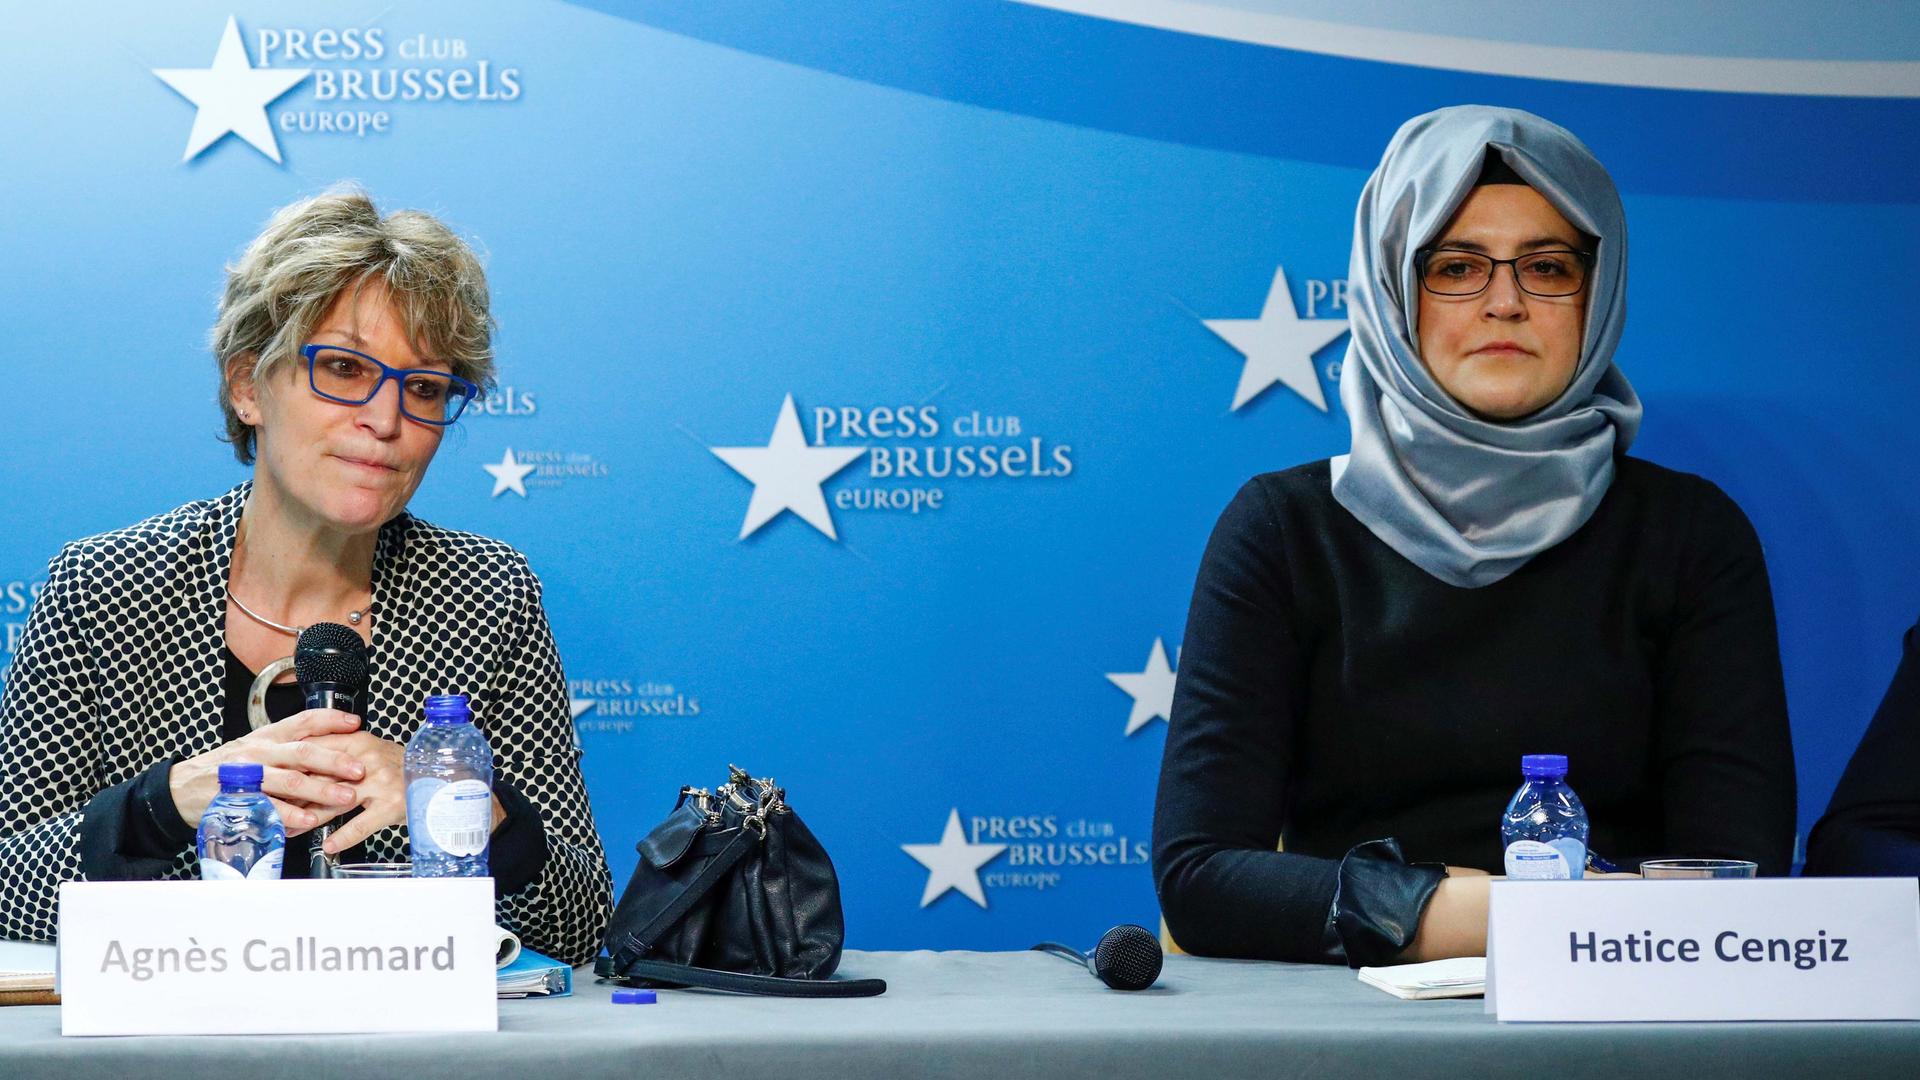 Agnès Callamard, U.N. special rapporteur on extrajudicial, summary or arbitrary executions, and Hatice Cengiz, the fiancee of murdered journalist Jamal Khashoggi, hold a news conference in Brussels, Belgium, on Dec. 3, 2019.